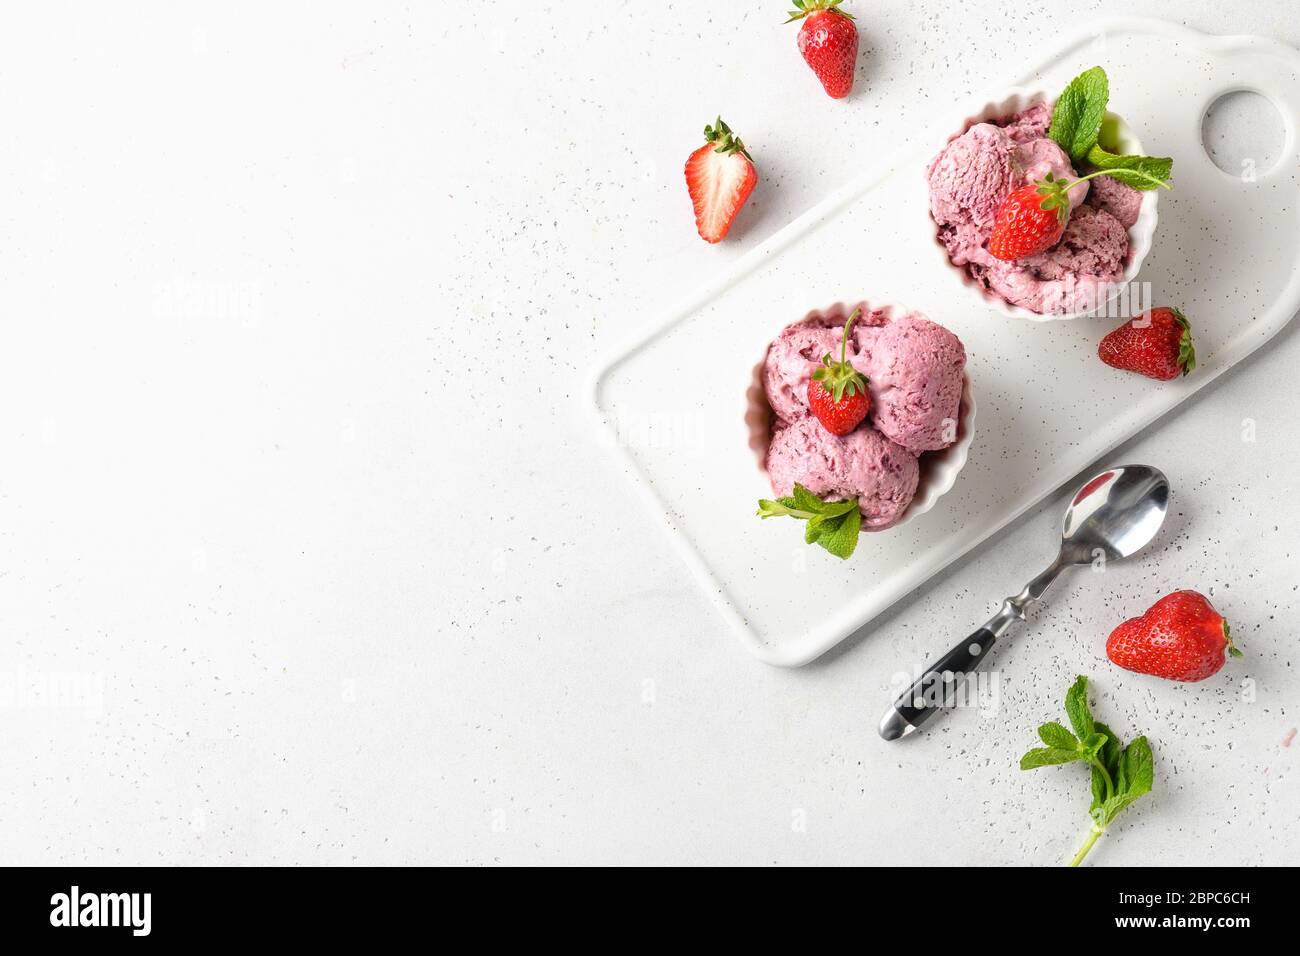 https://c8.alamy.com/comp/2BPC6CH/homemade-strawberry-ice-cream-in-bowls-on-white-background-view-from-above-space-for-text-clean-eating-without-sugar-2BPC6CH.jpg